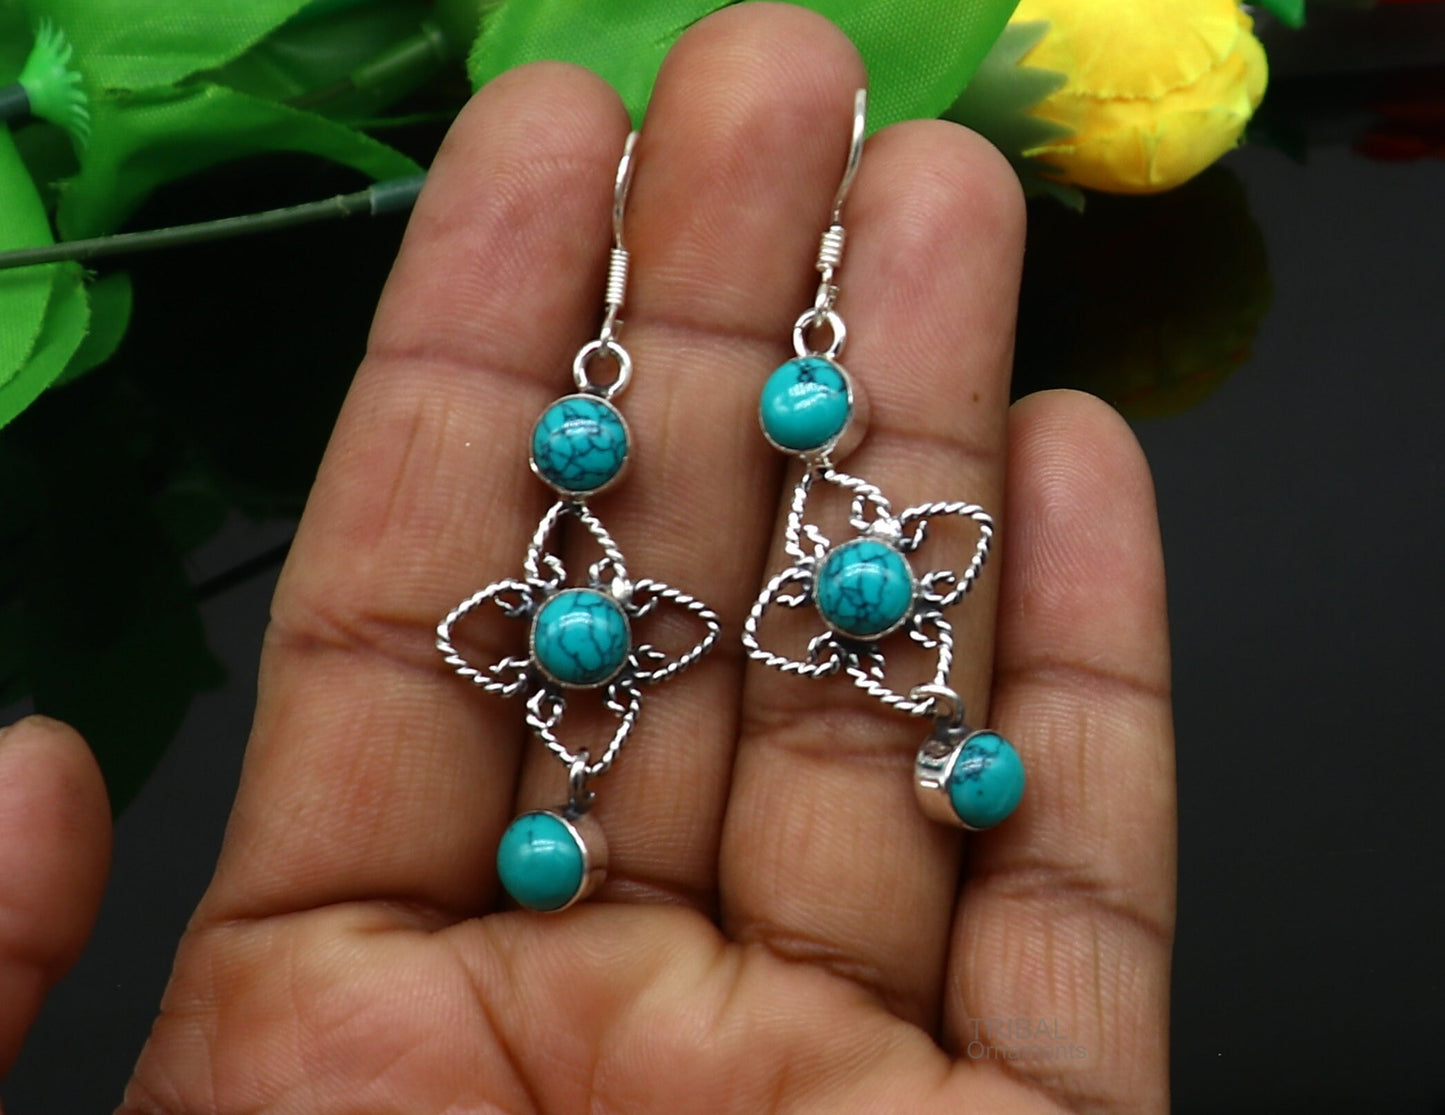 925 sterling silver hoops earring, gorgeous Blue turquoise stone charm earring excellent gifting brides earring party jewelry s993 - TRIBAL ORNAMENTS